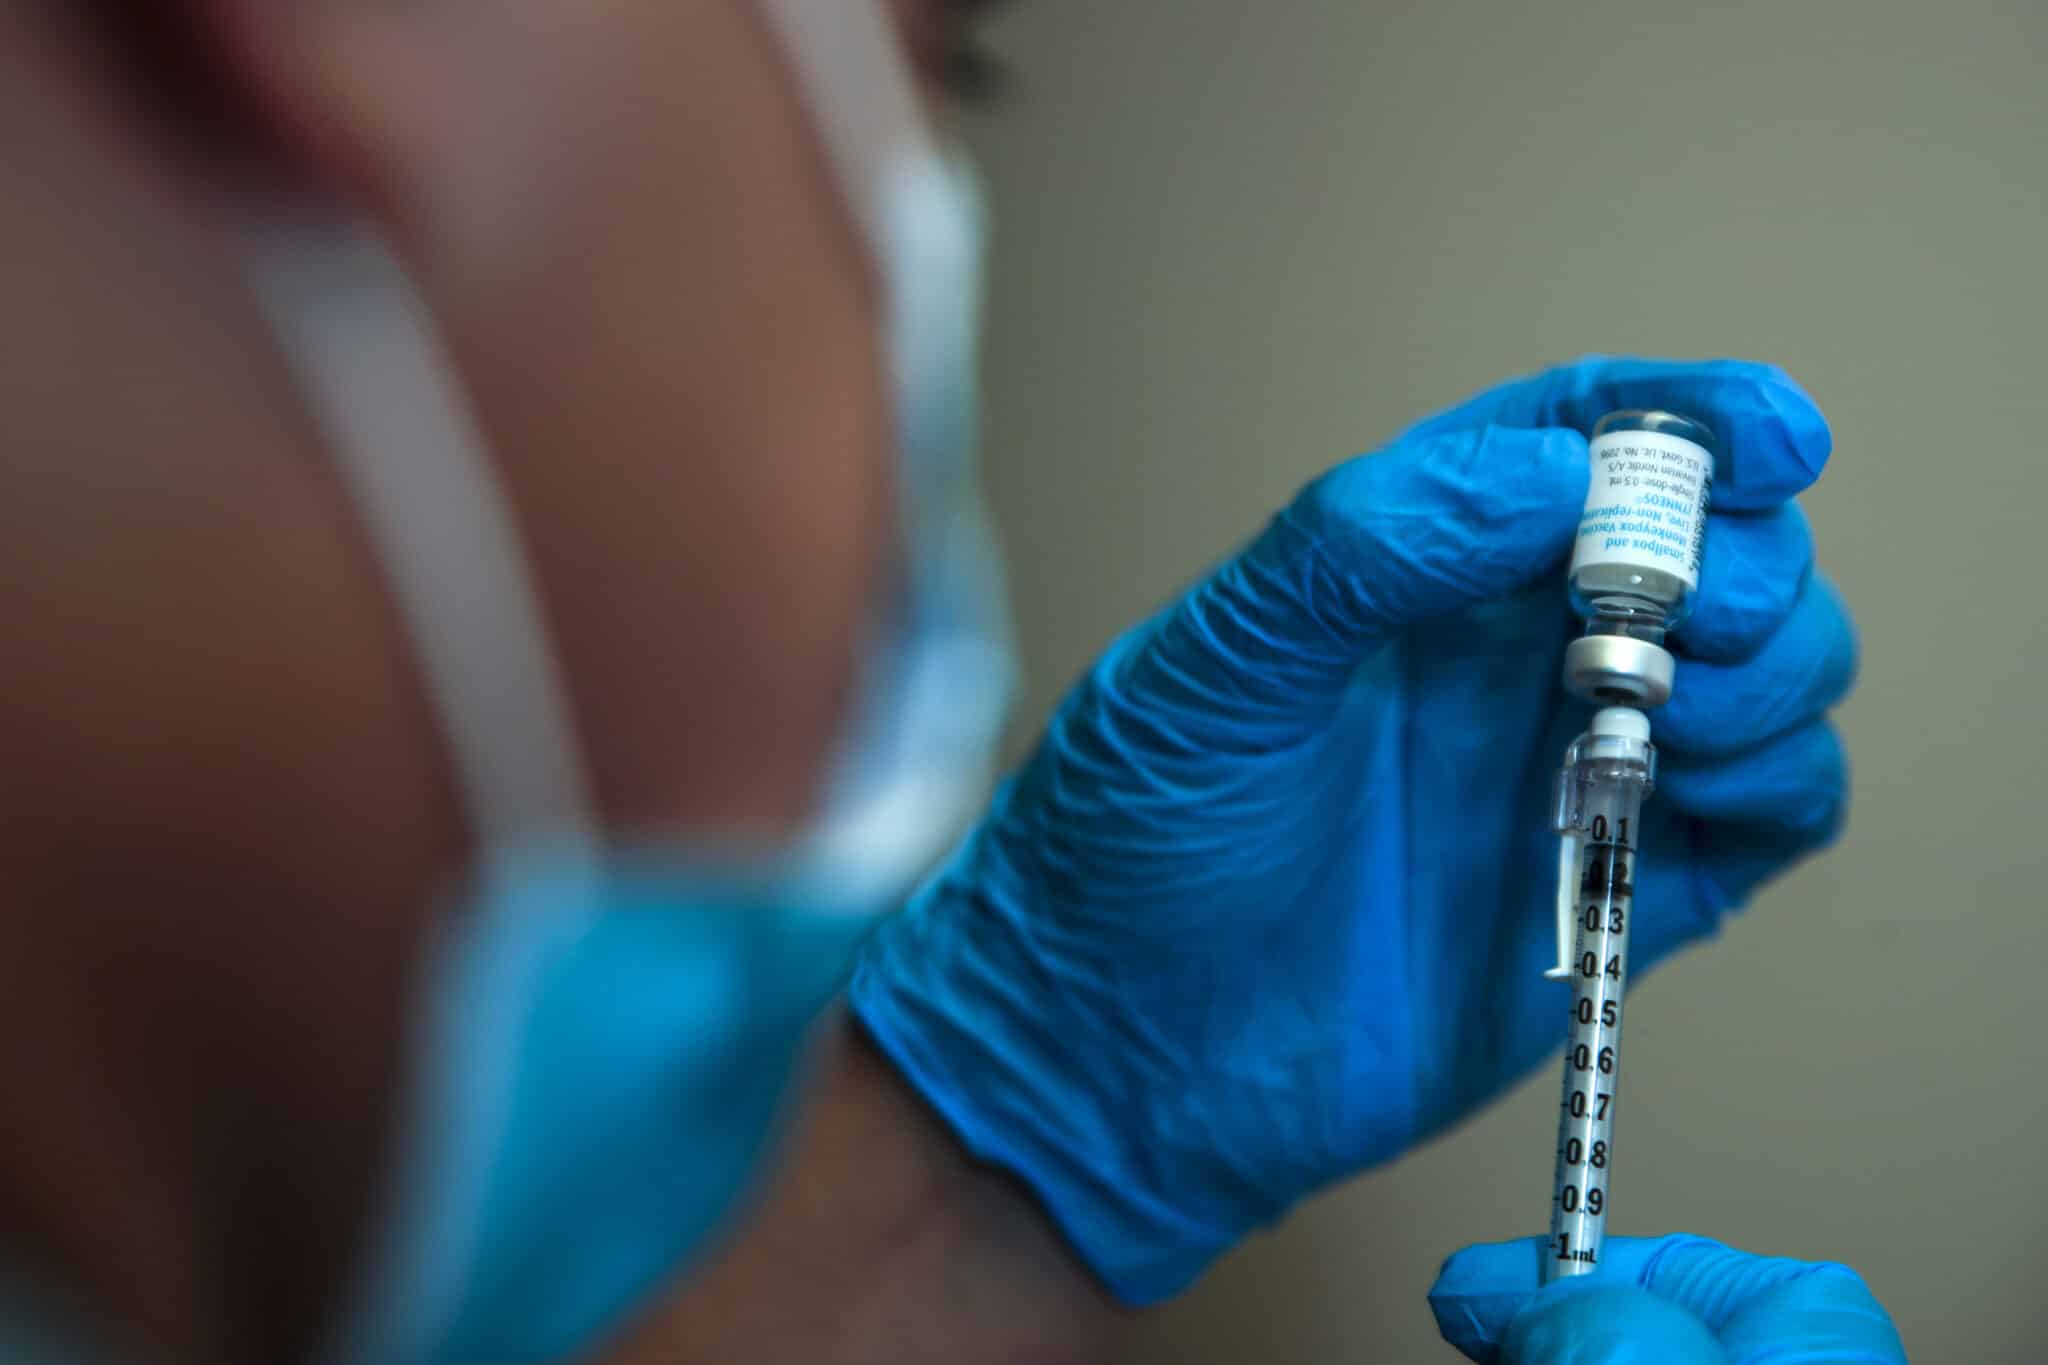 Monkeypox: Clinic slammed for making people sign sexual history paperwork before getting vaccine